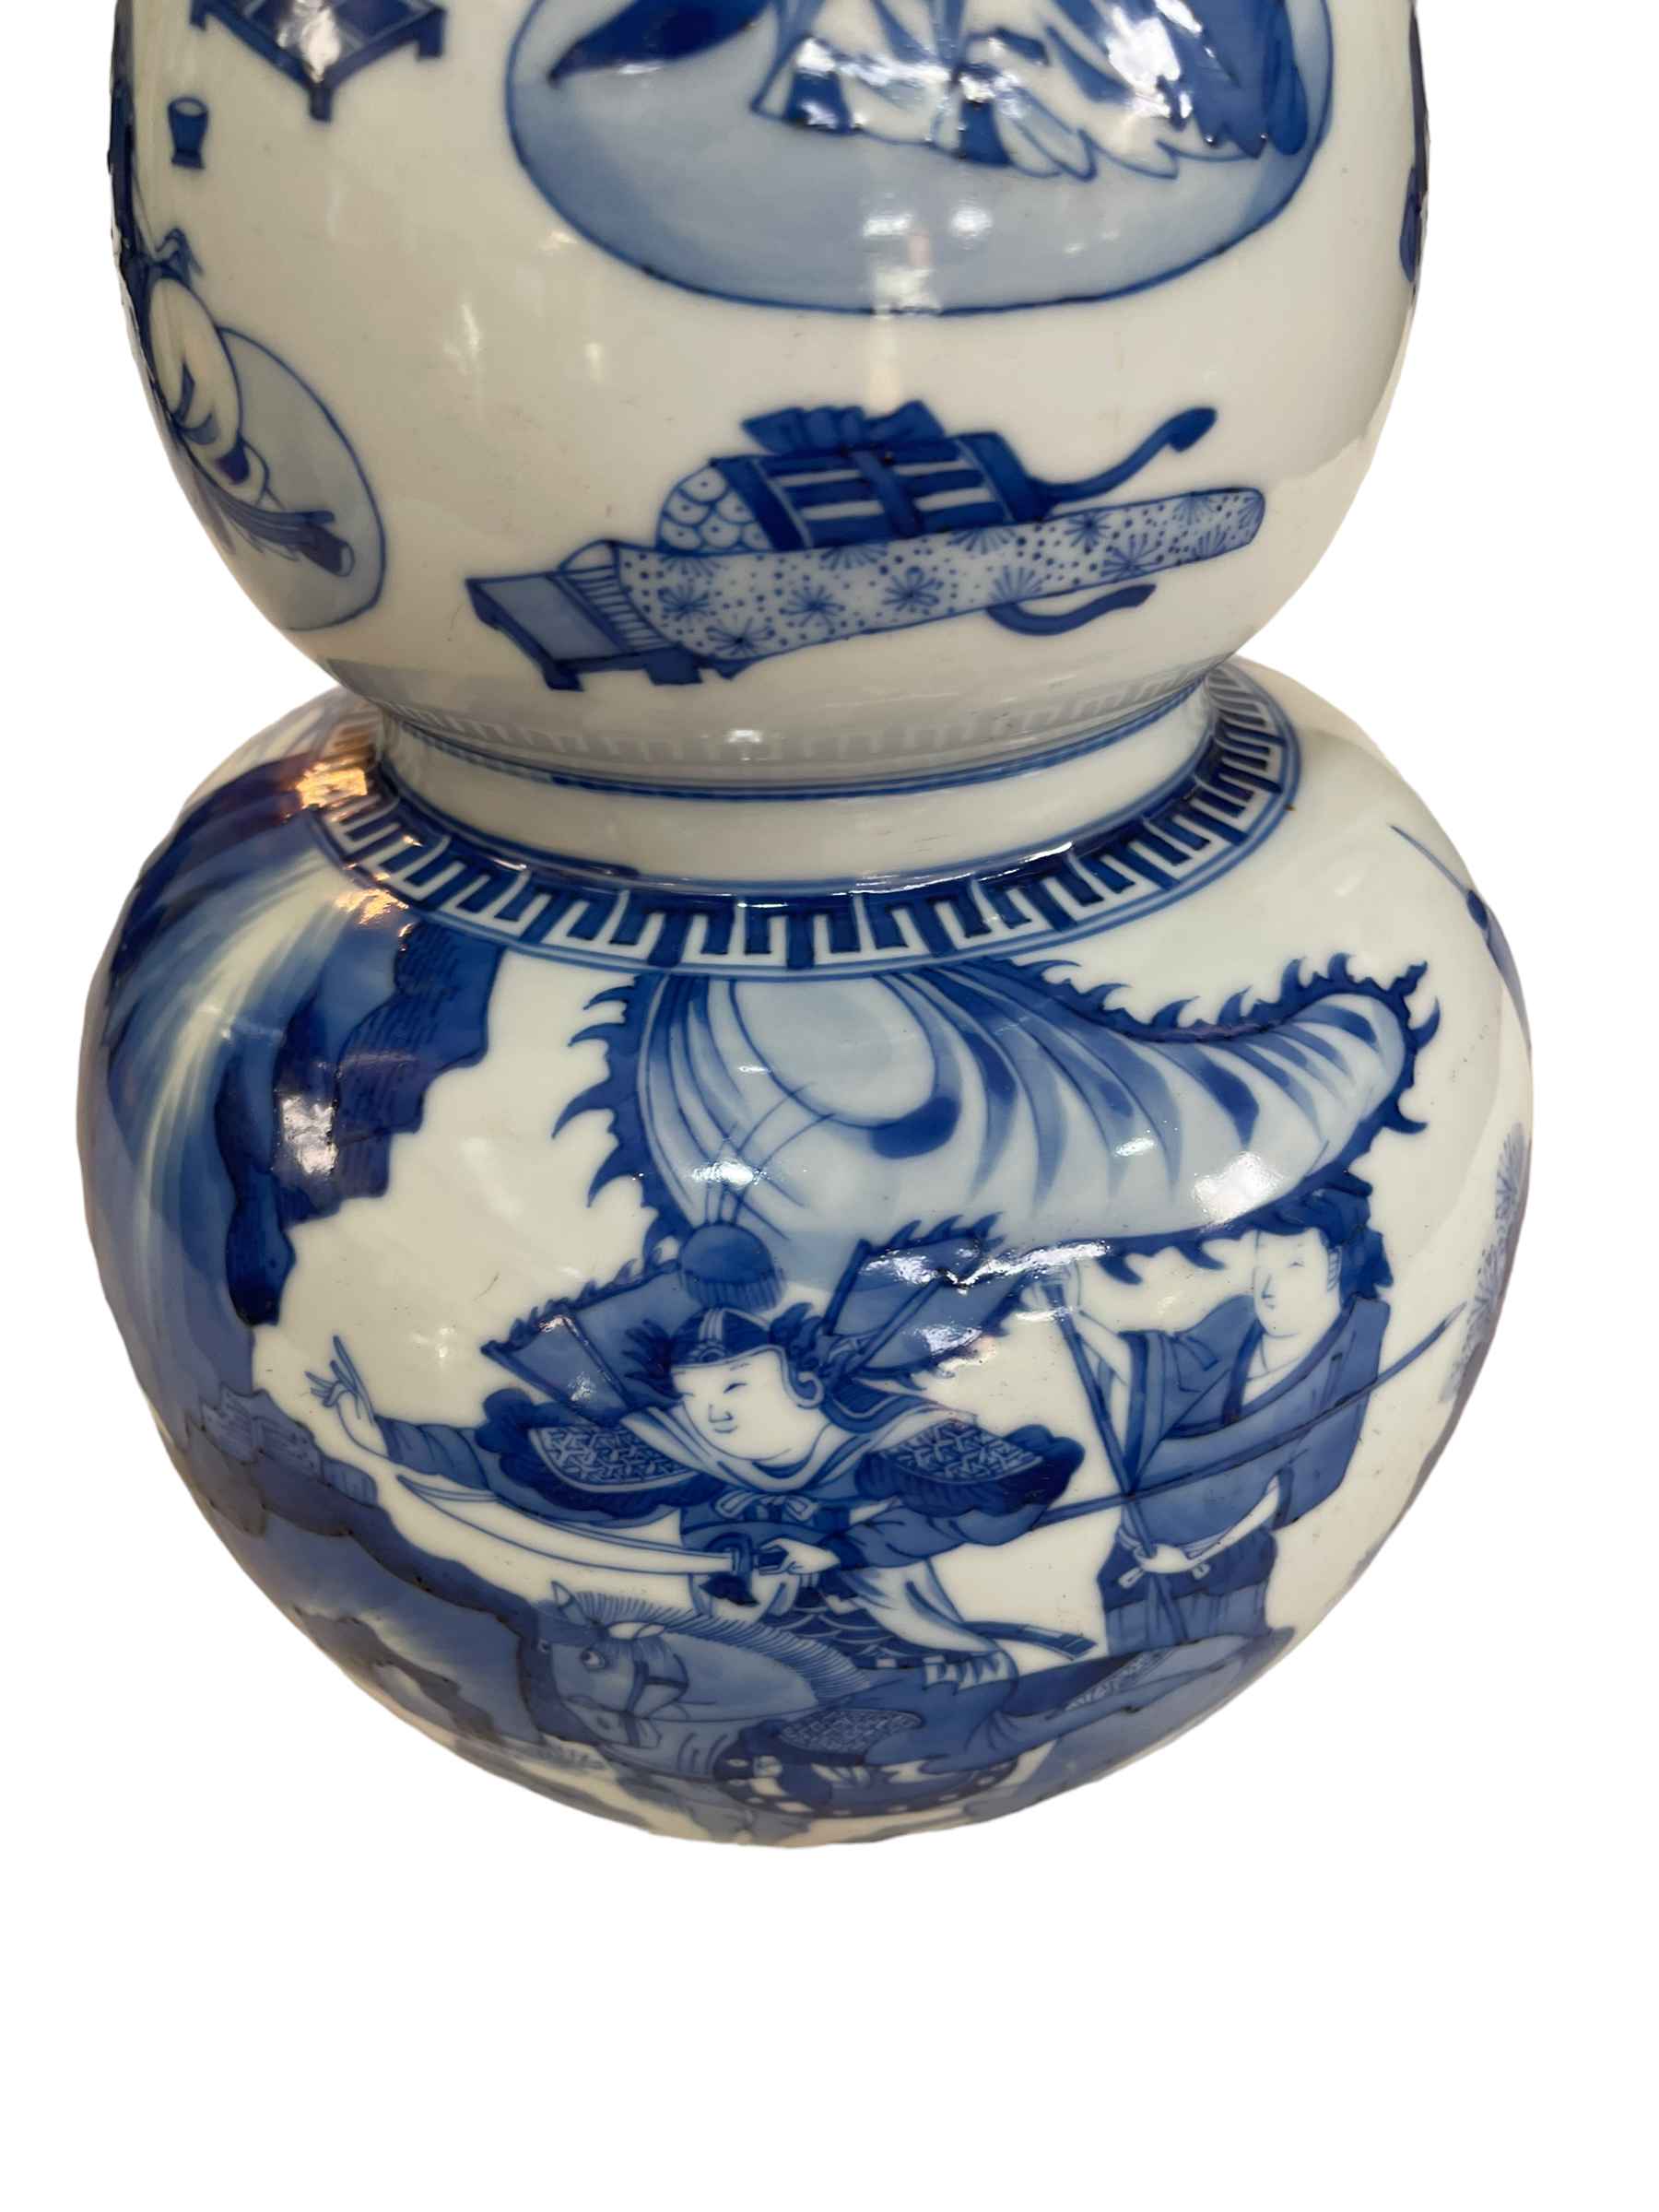 Large Chinese double gourd vase decorated with figures and landscape scenes, 41cm high. - Image 3 of 3